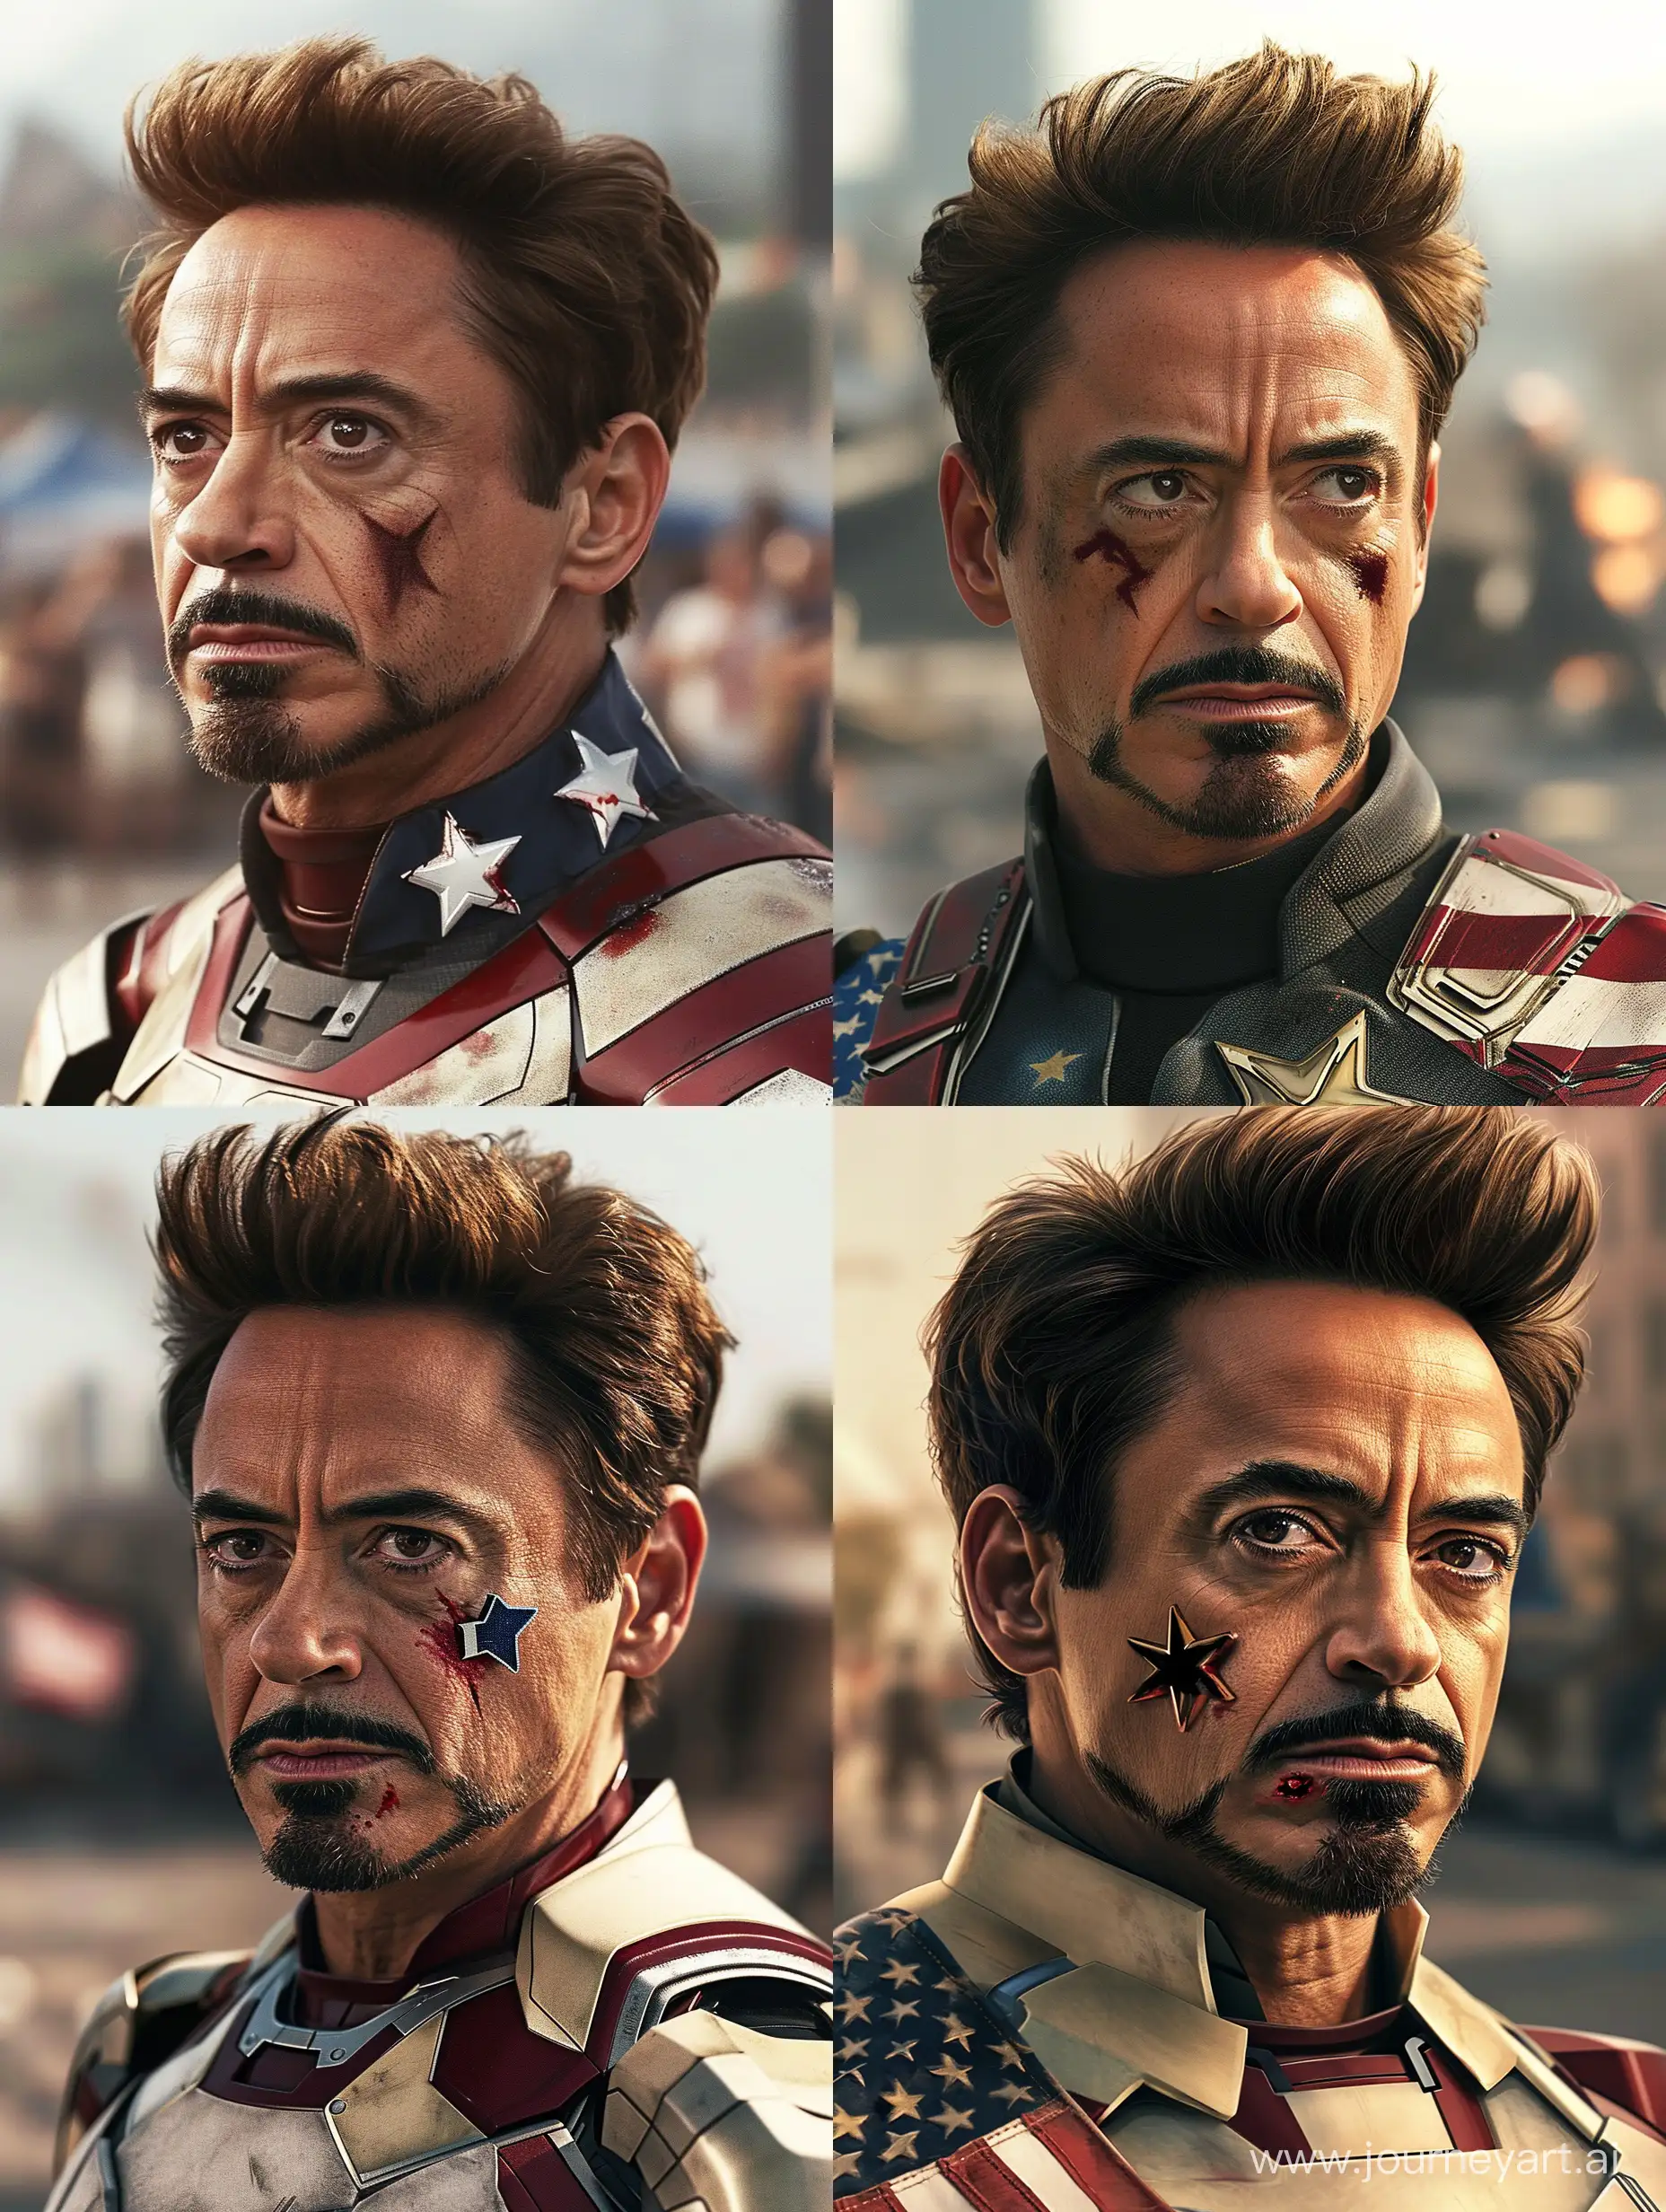 Tony-Stark-in-Determined-Pose-with-American-Flag-Costume